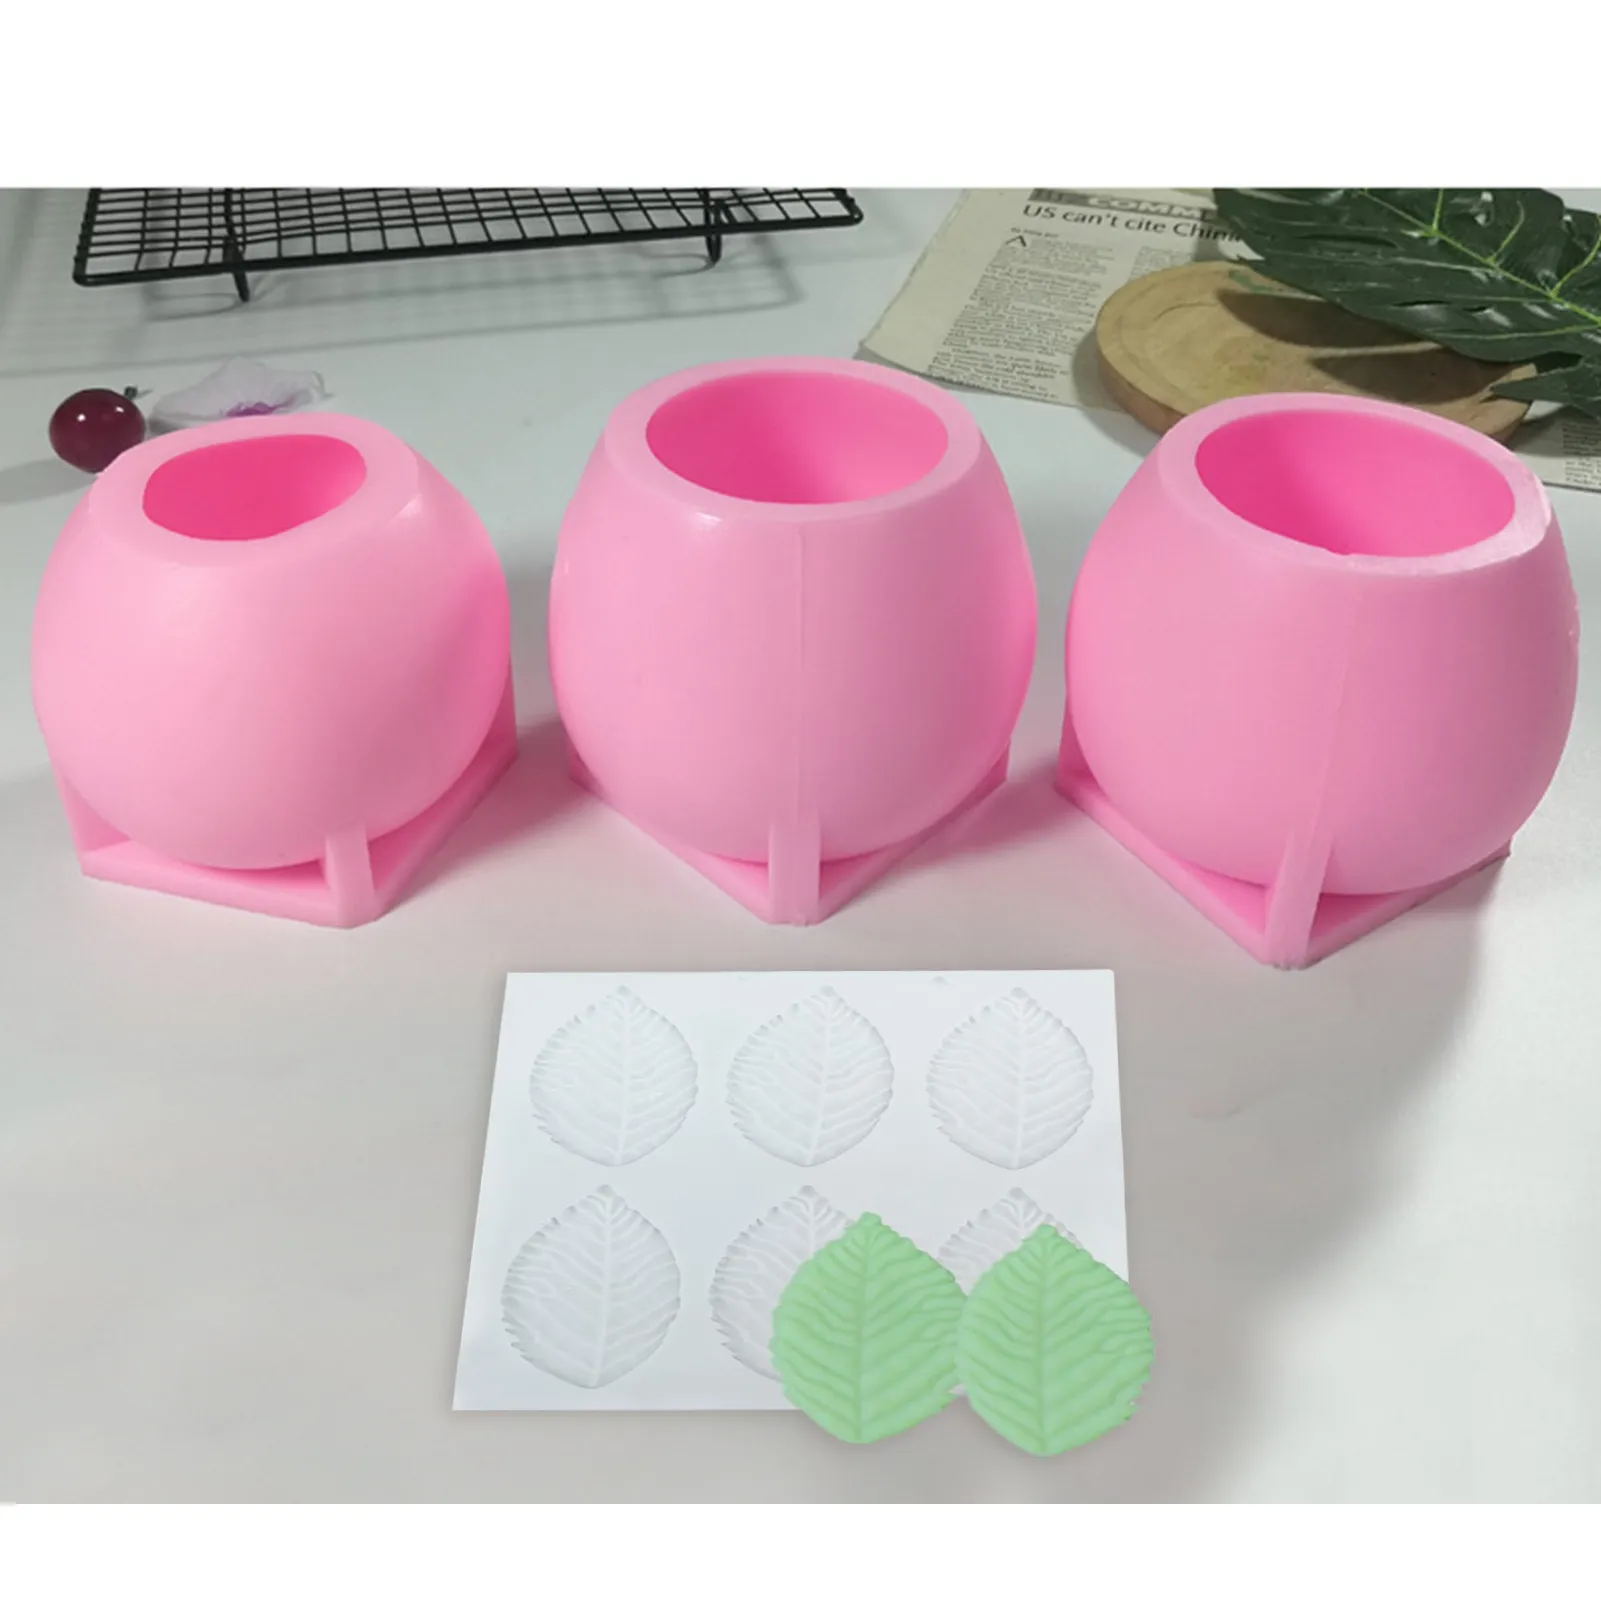 3D Apple Shape Silicone Mould DIY Silicone Candle Mold Creative Apple-Shaped Candle Mold Epoxy Casting Candle Mold For Art